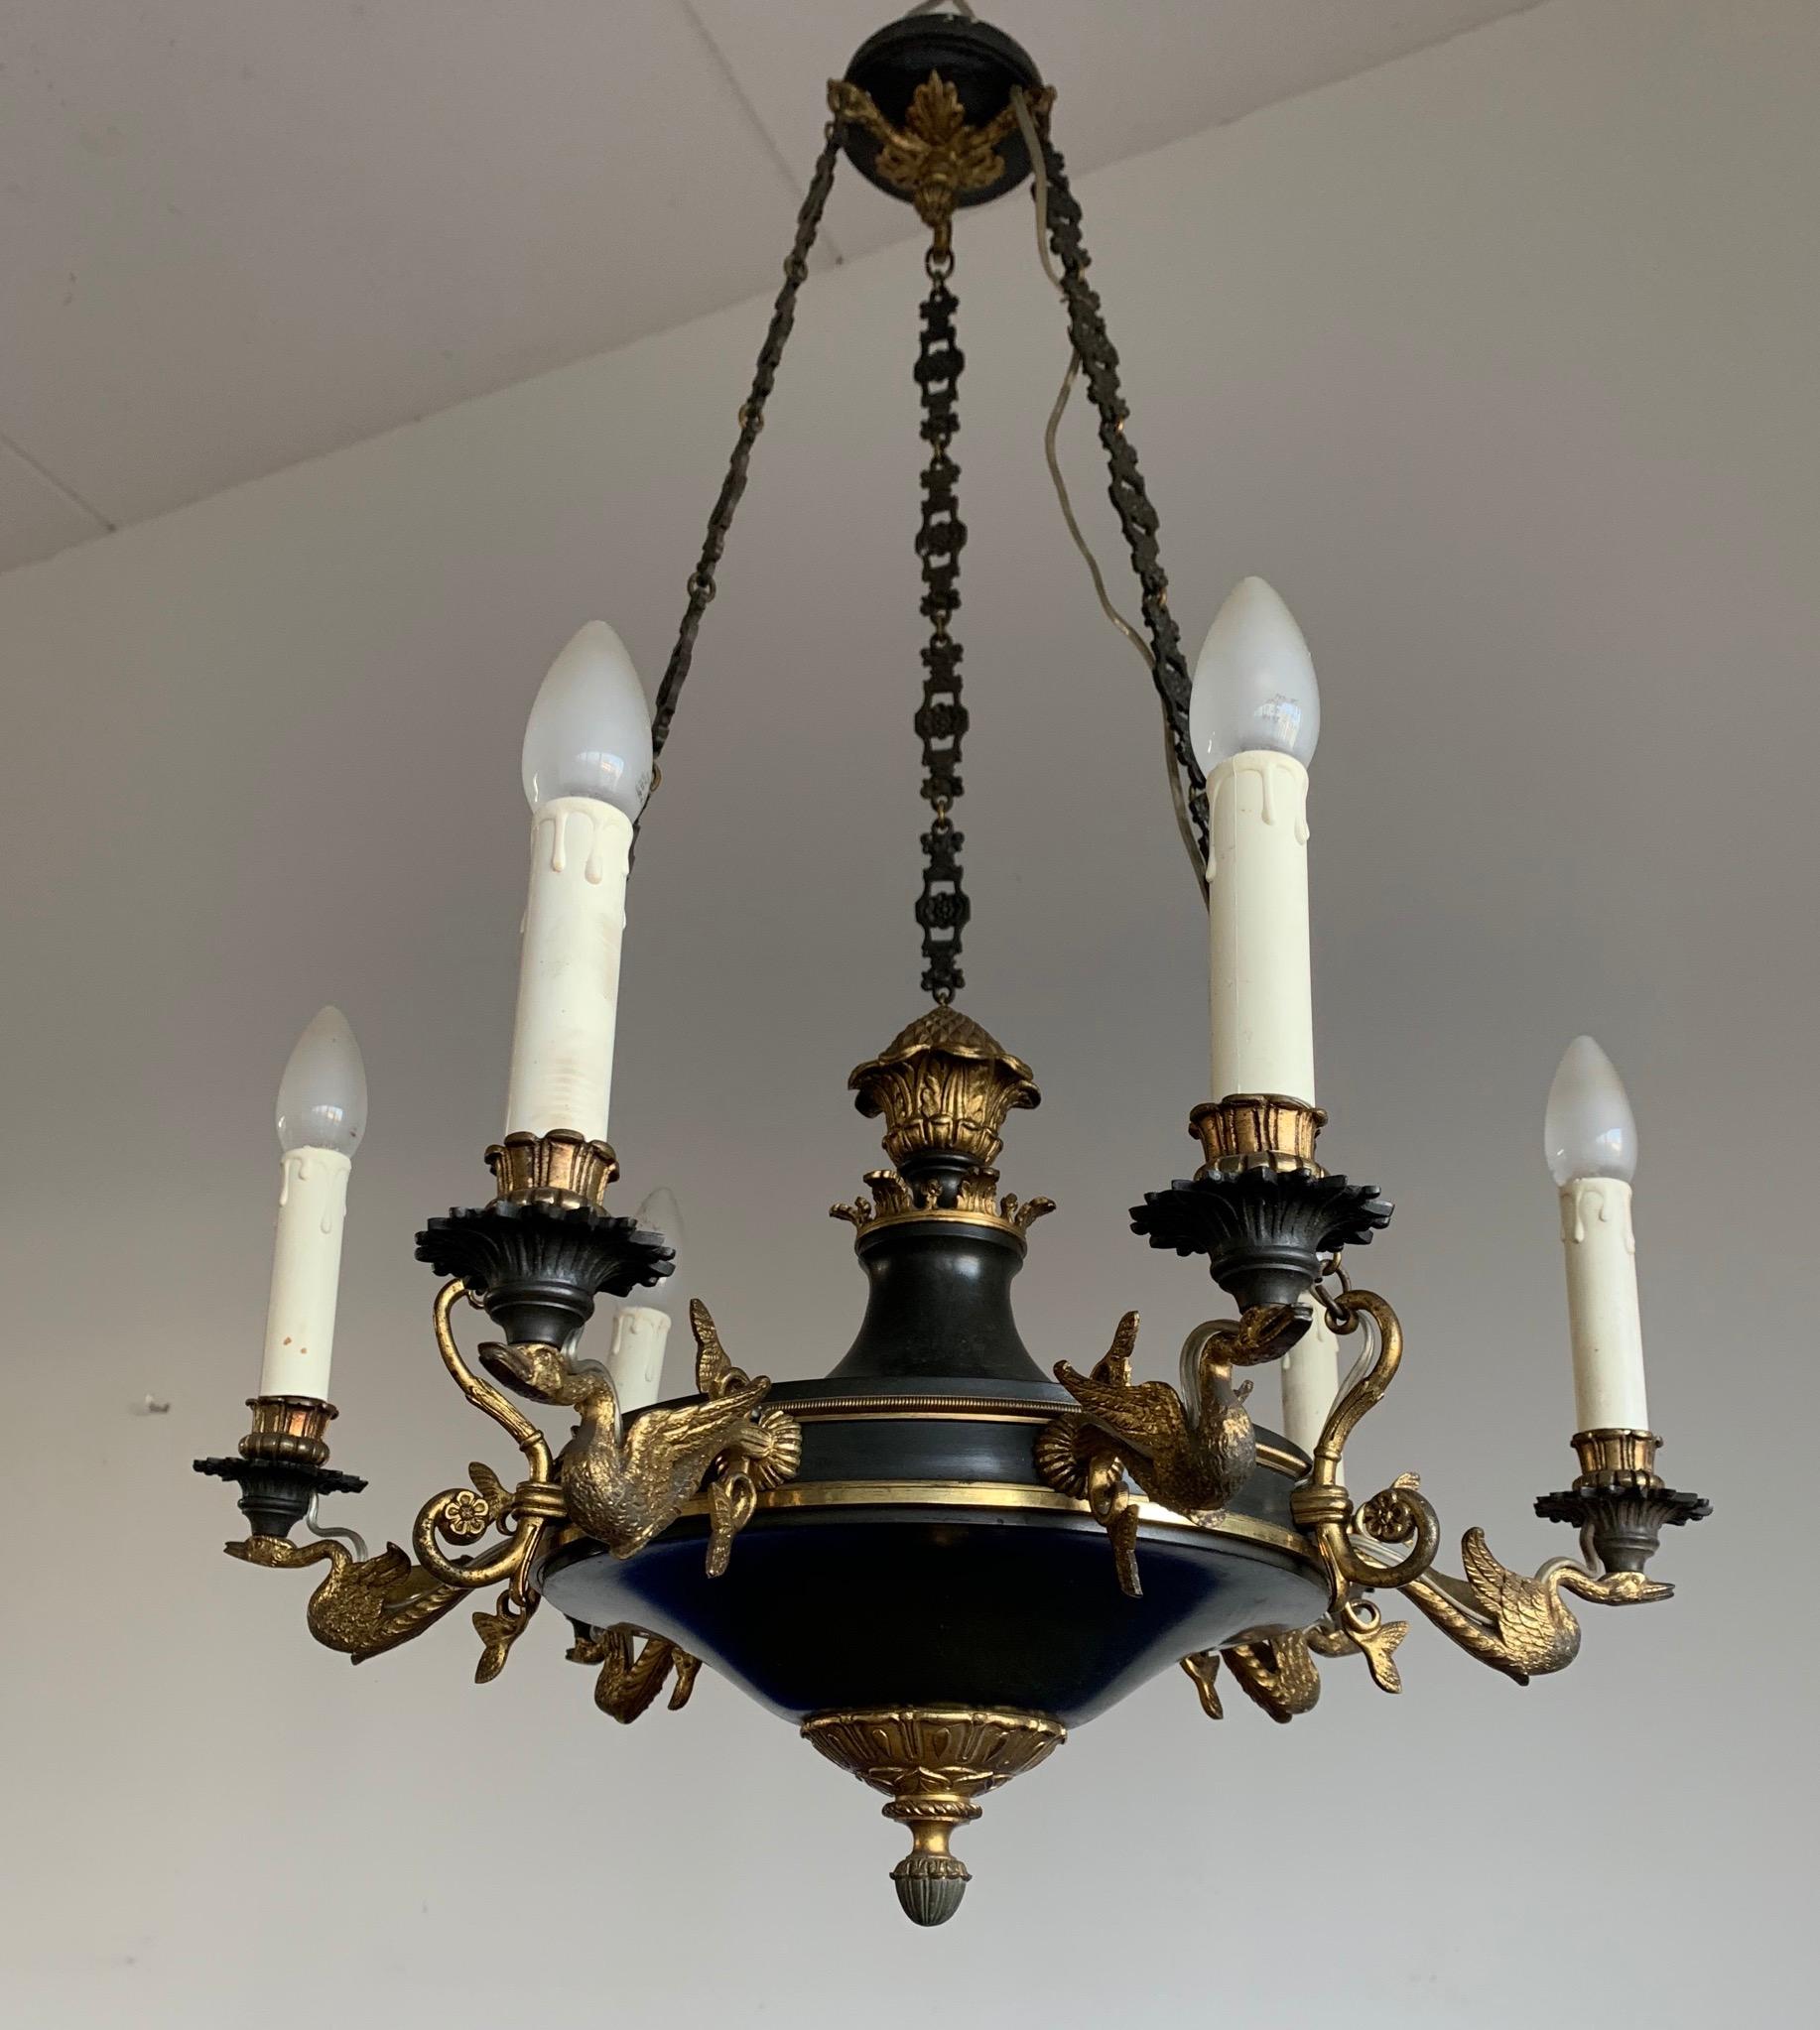 Stunning and fine size chandelier with gilt bronze swan sculptures. 

If you are looking for a truly stylish, well proportioned and top quality made chandelier then this turn of the century work of lighting art could be perfect for you. The overall